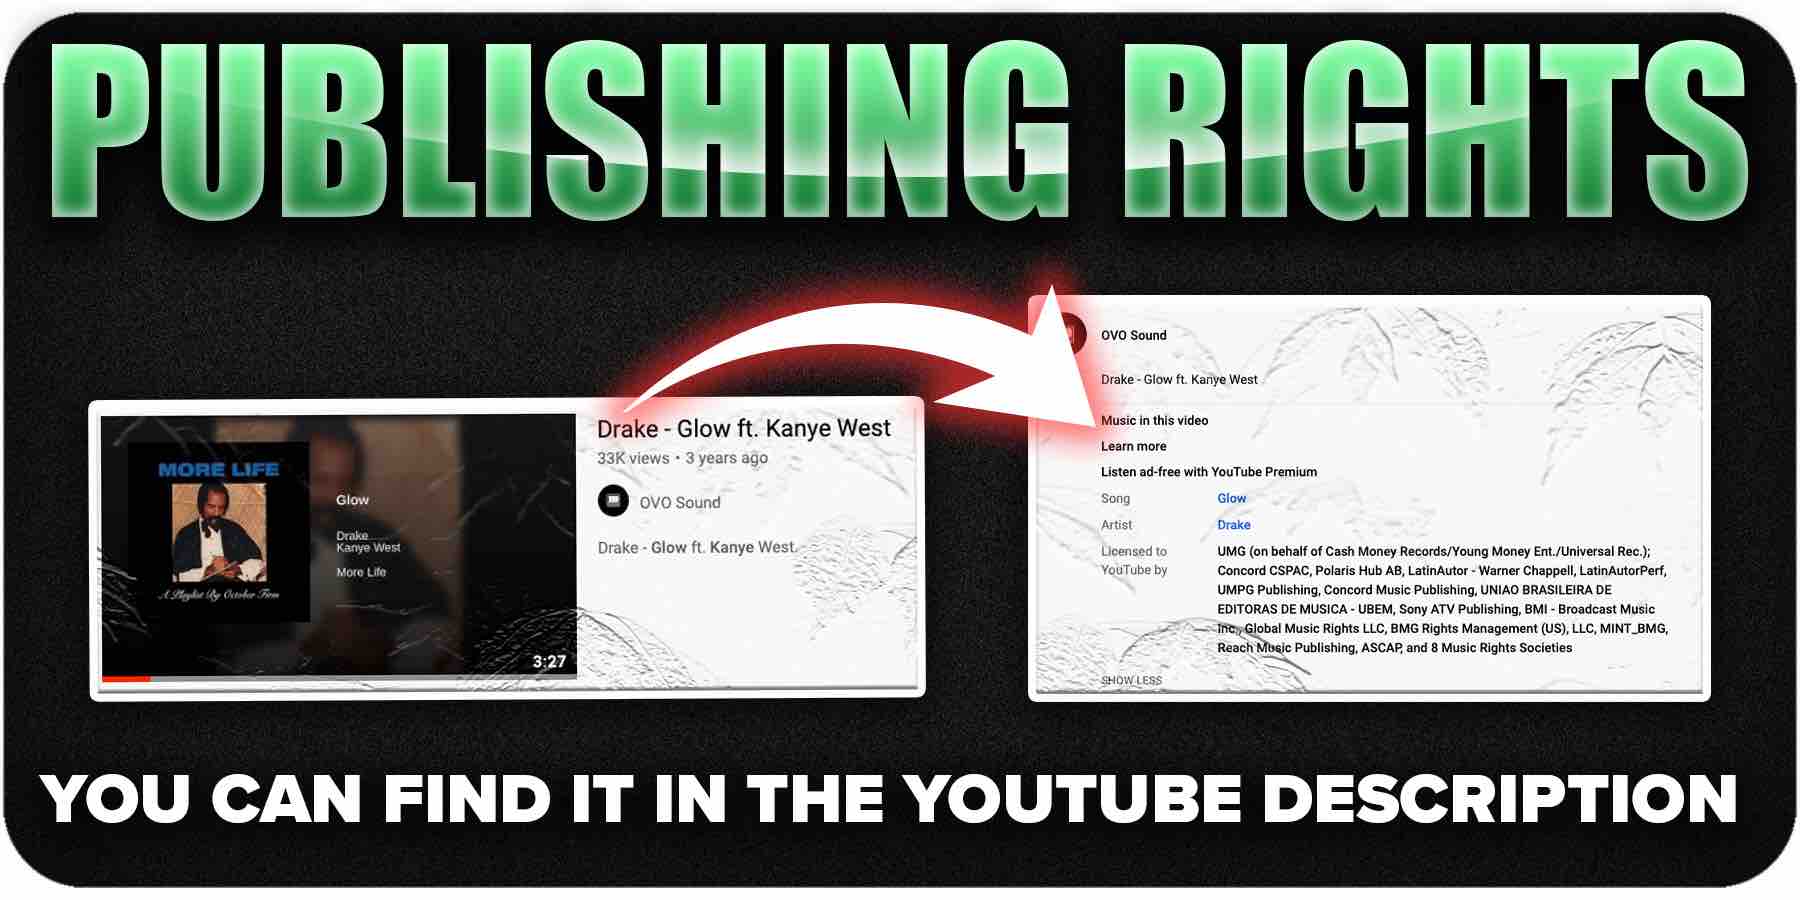 How to find Publishing Rights owners on Youtube